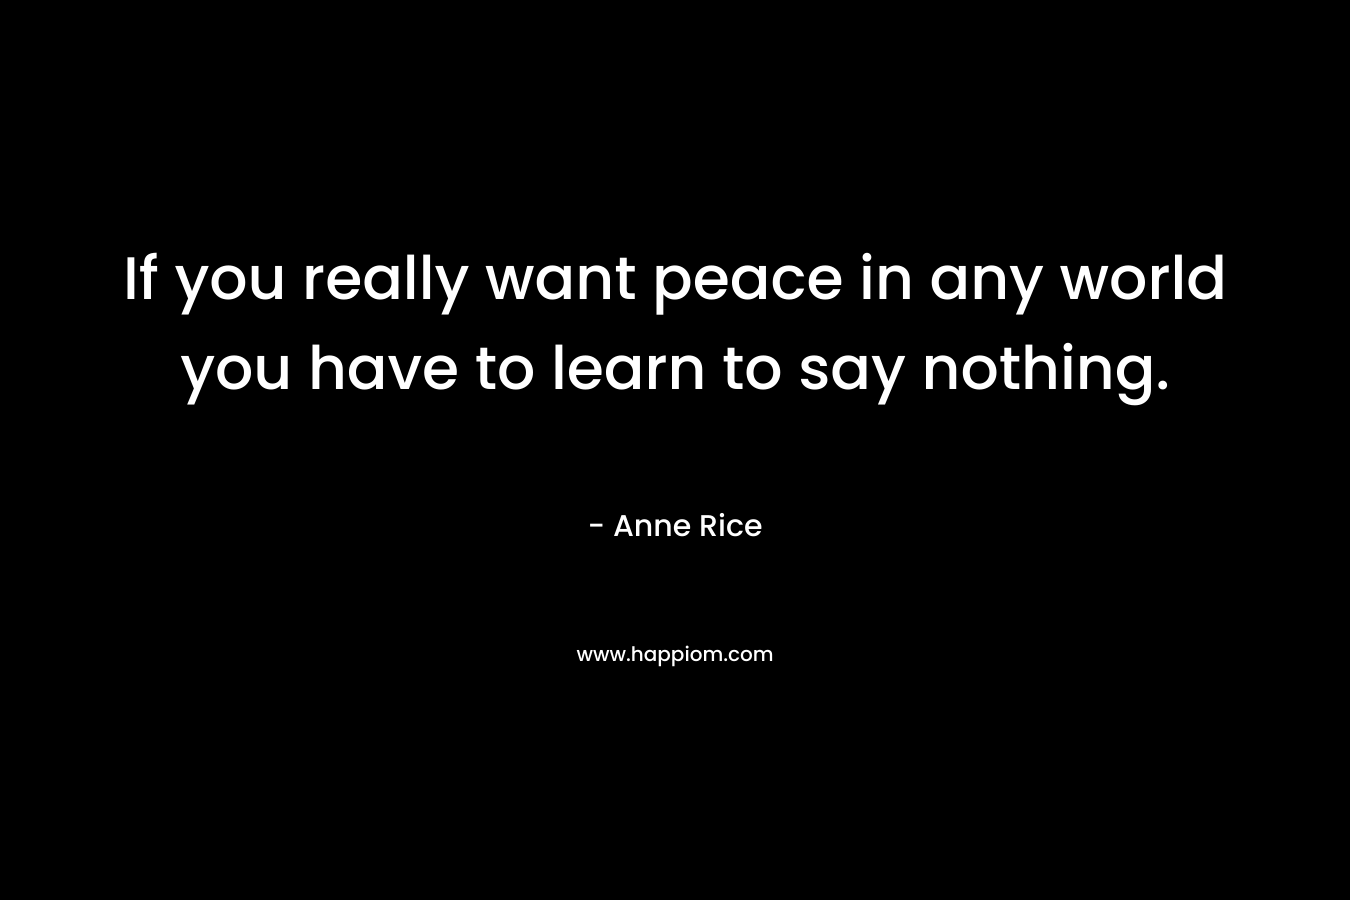 If you really want peace in any world you have to learn to say nothing.